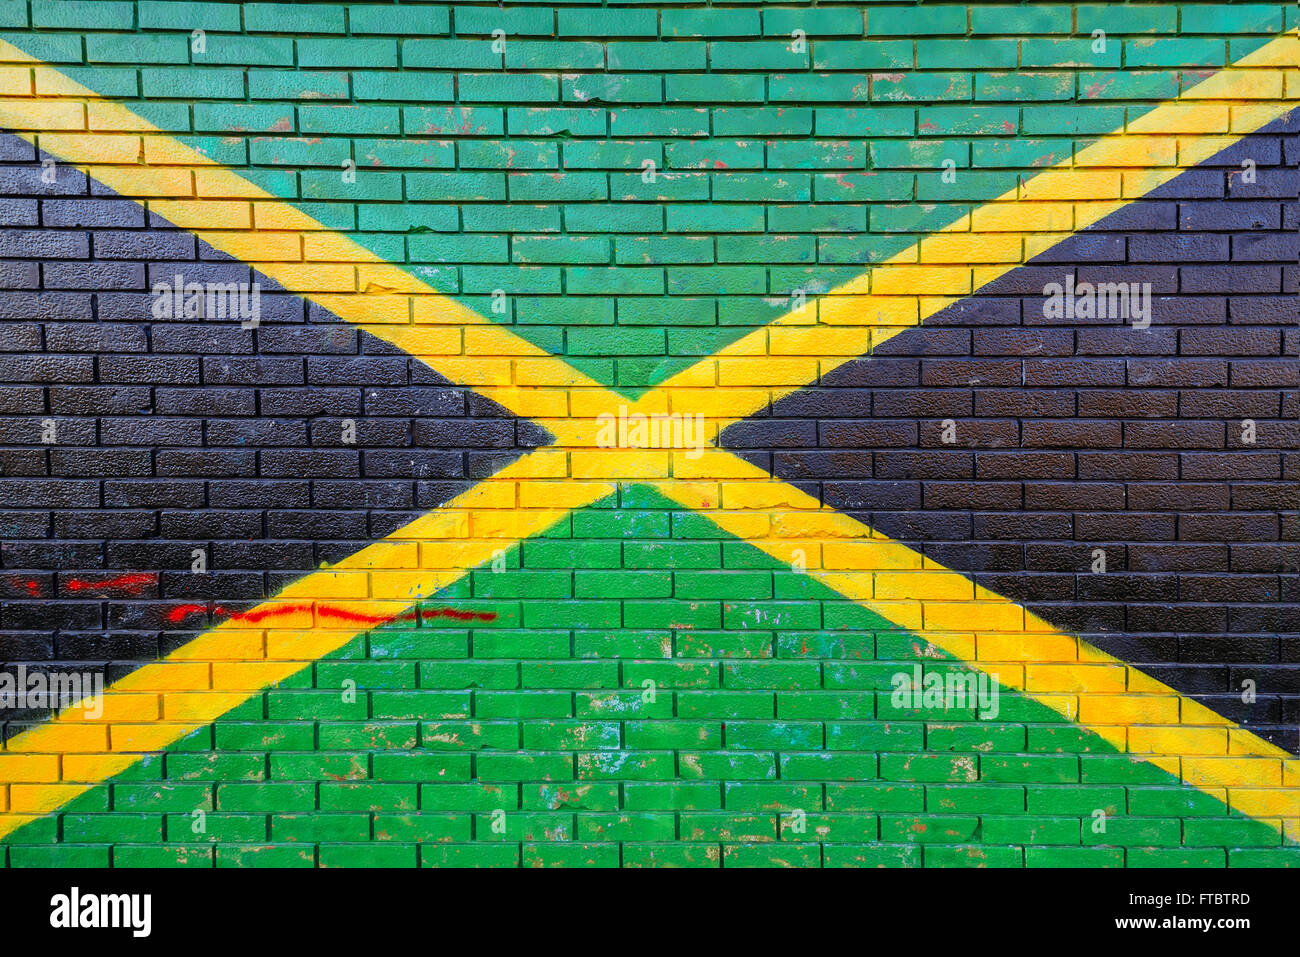 Jamaica flag painted on brick wall in urban environment Stock Photo